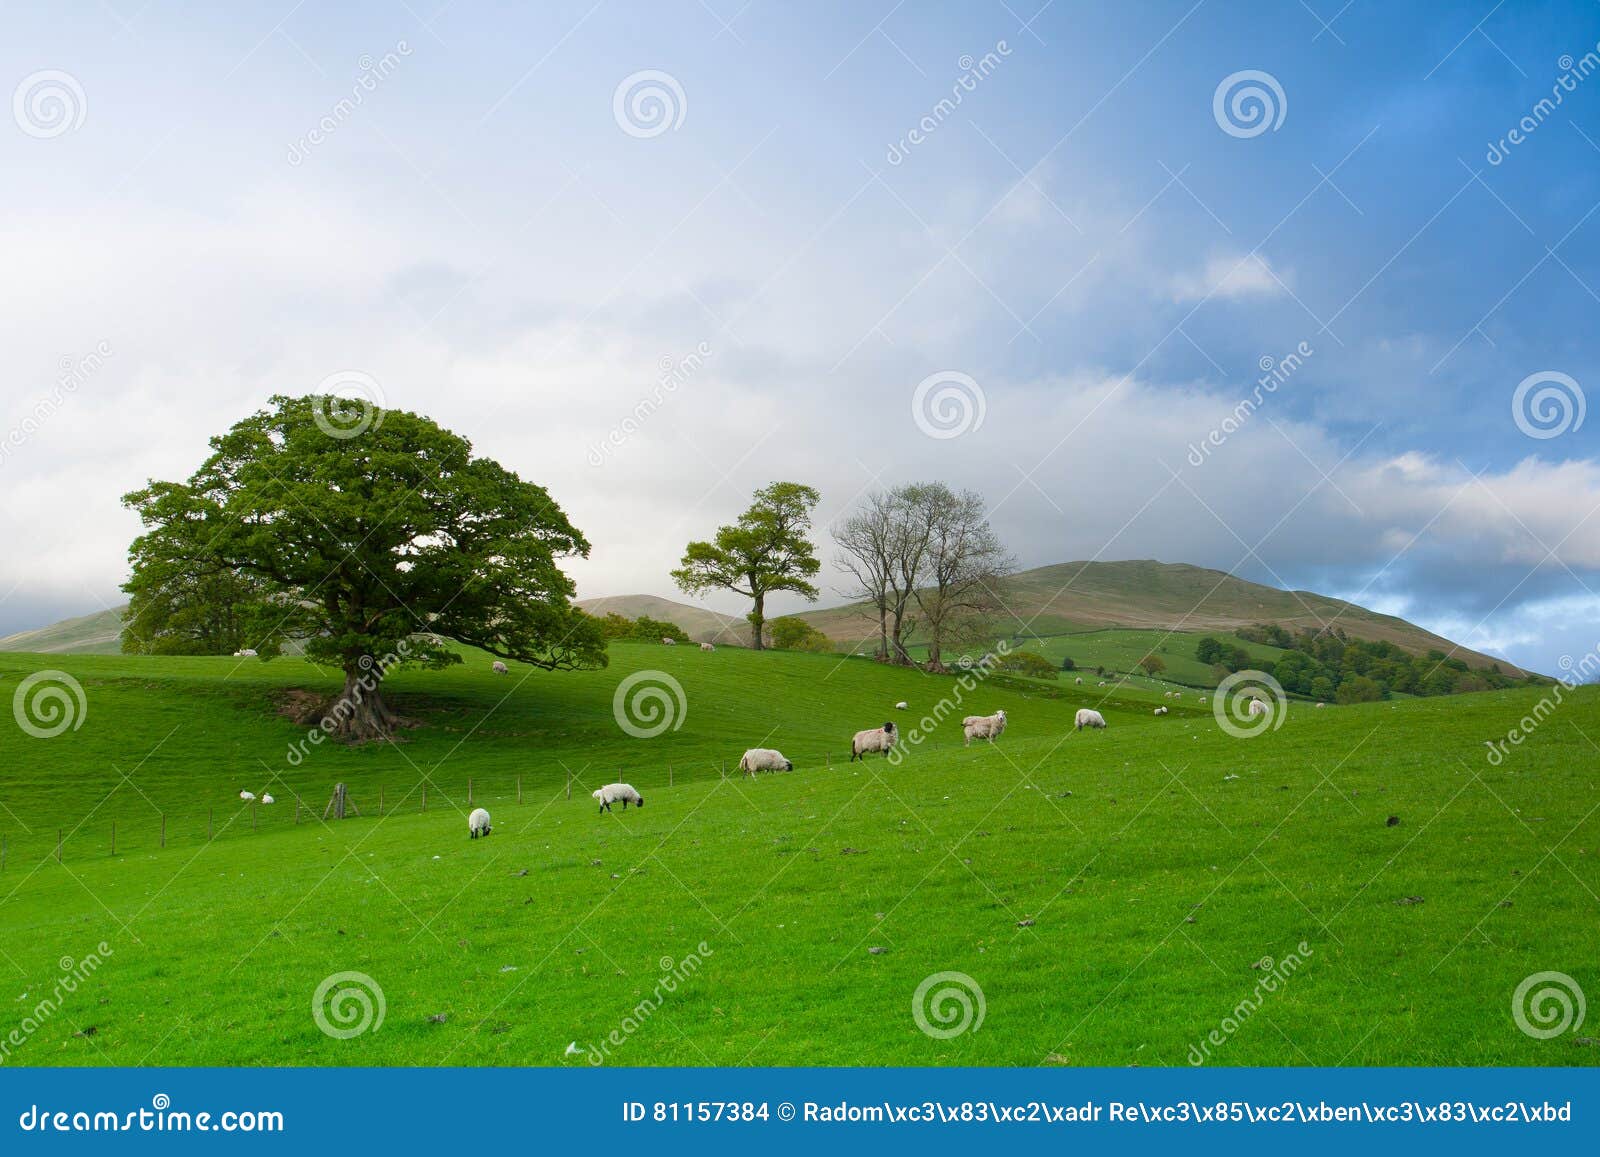 green fields in the english countryside with grazing sheep. england